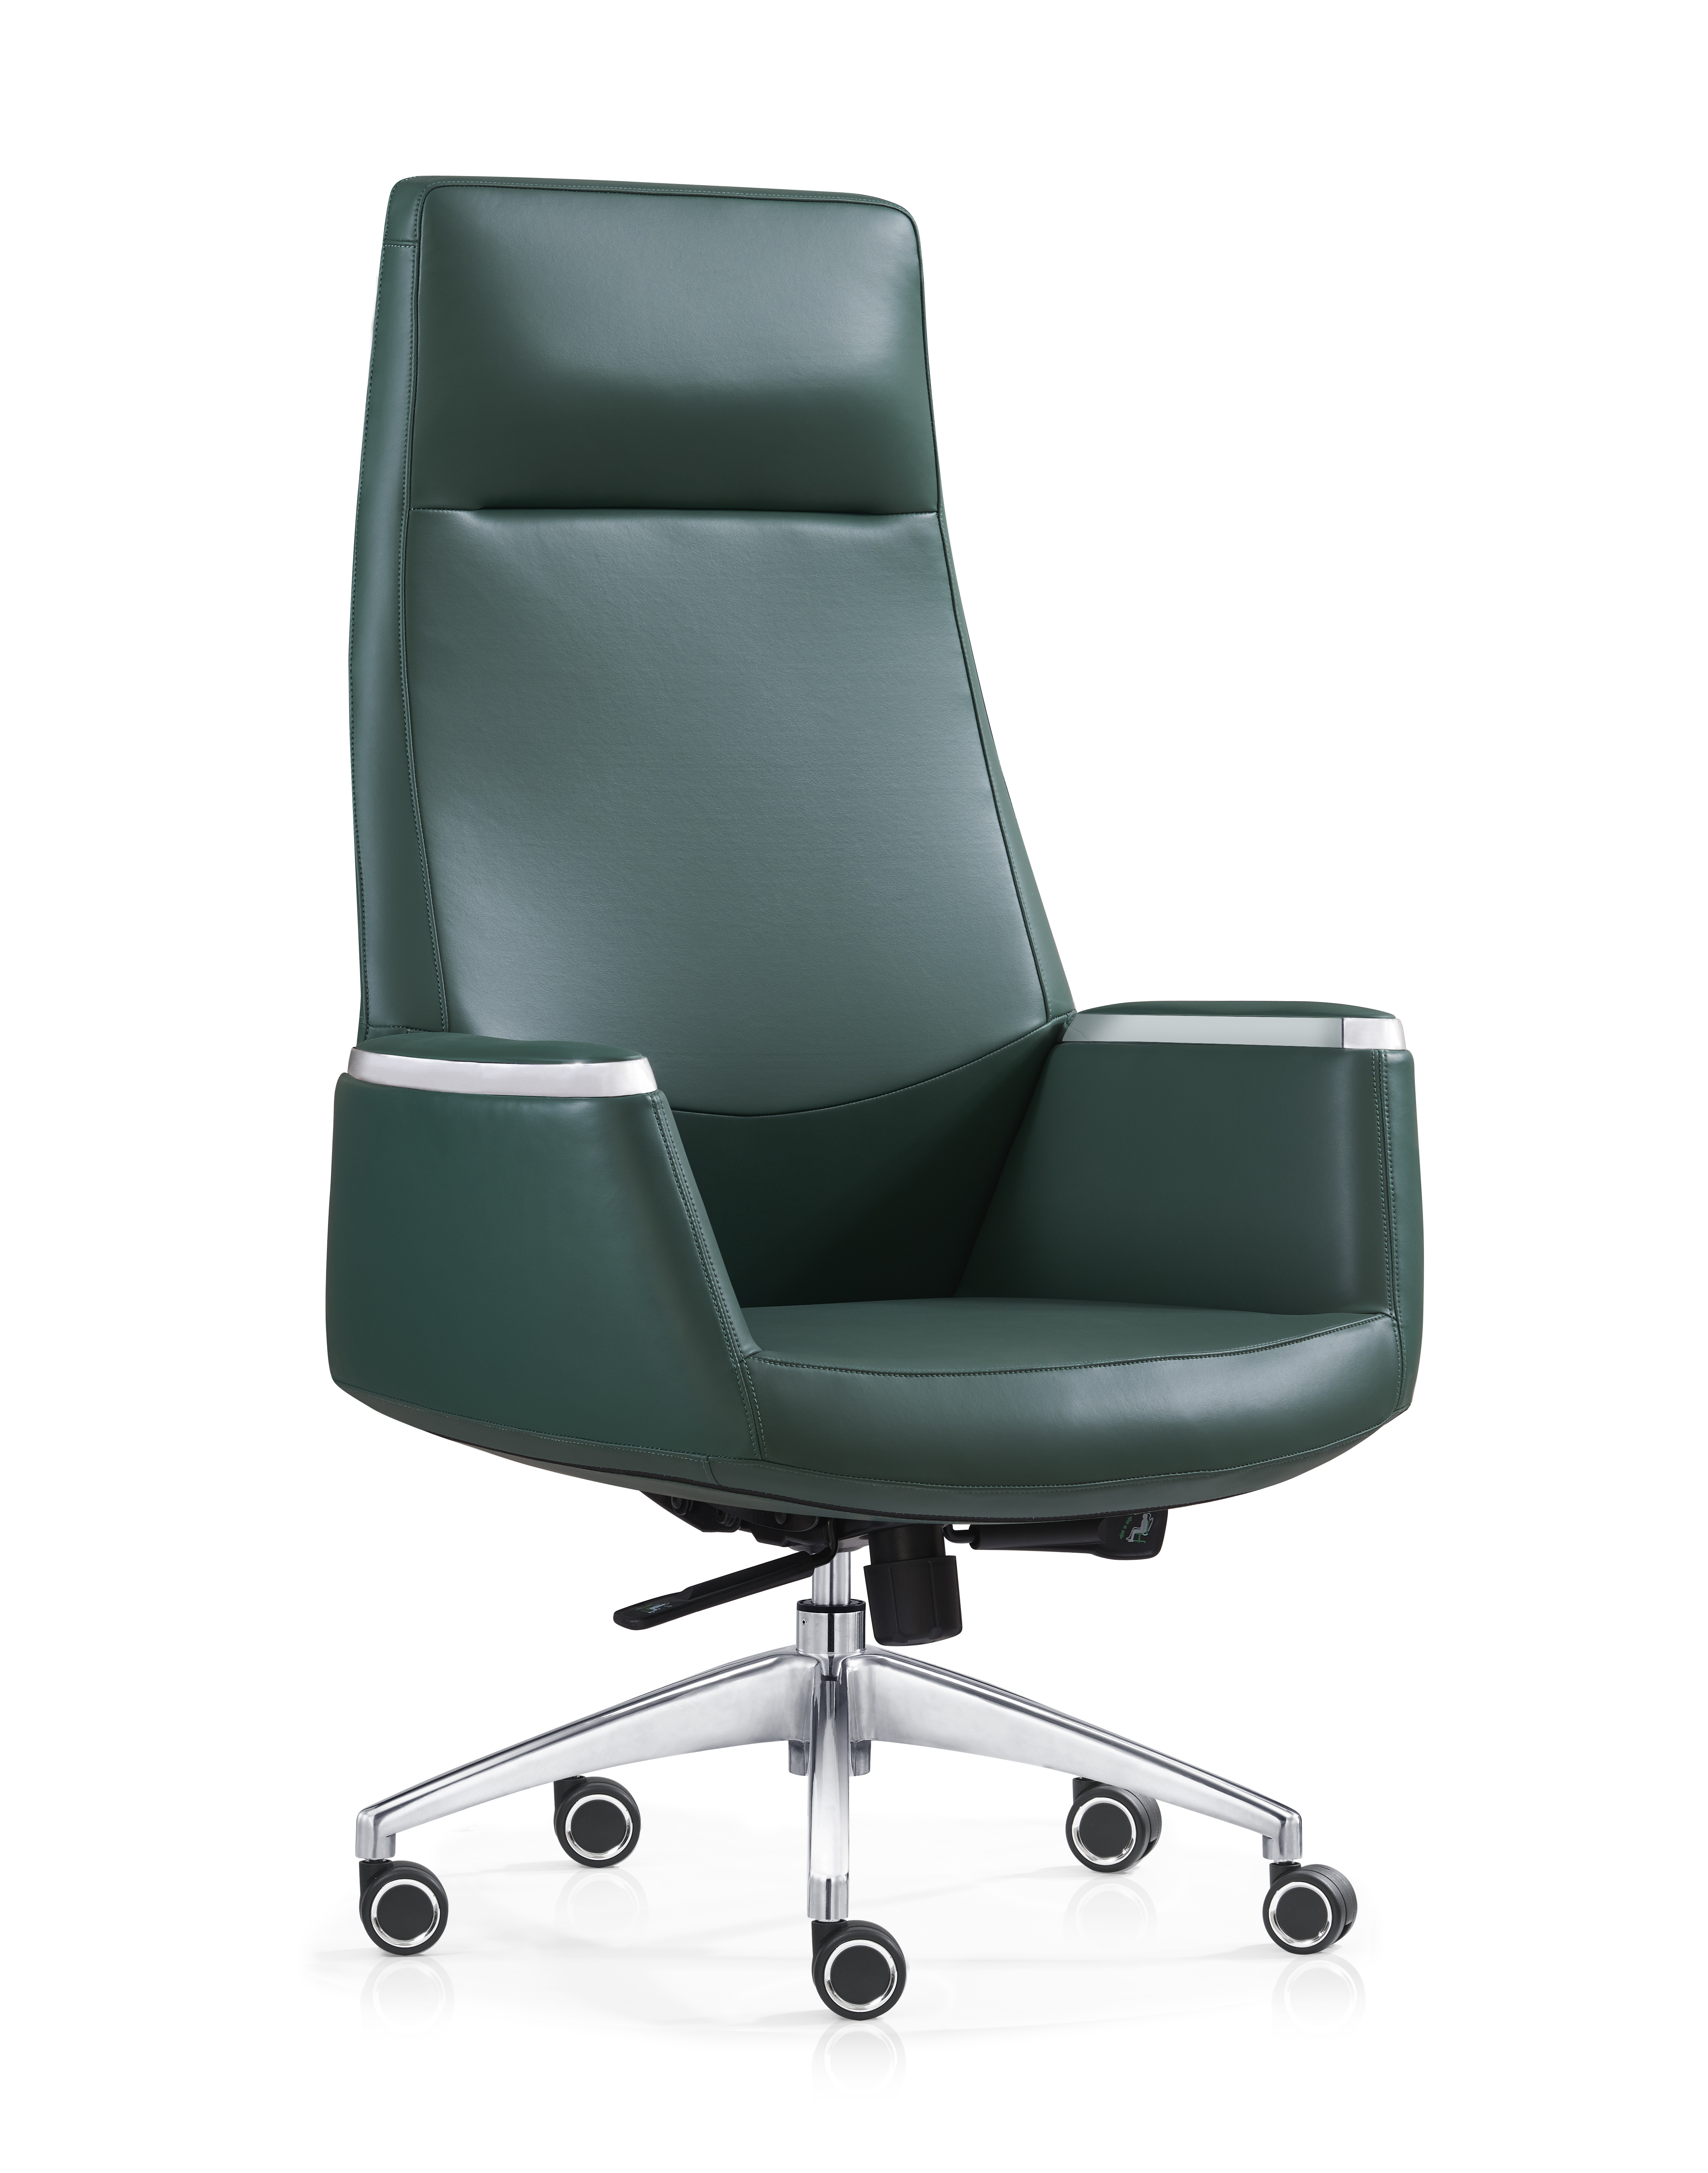 Premium Executive Leather Swivel Office Chair